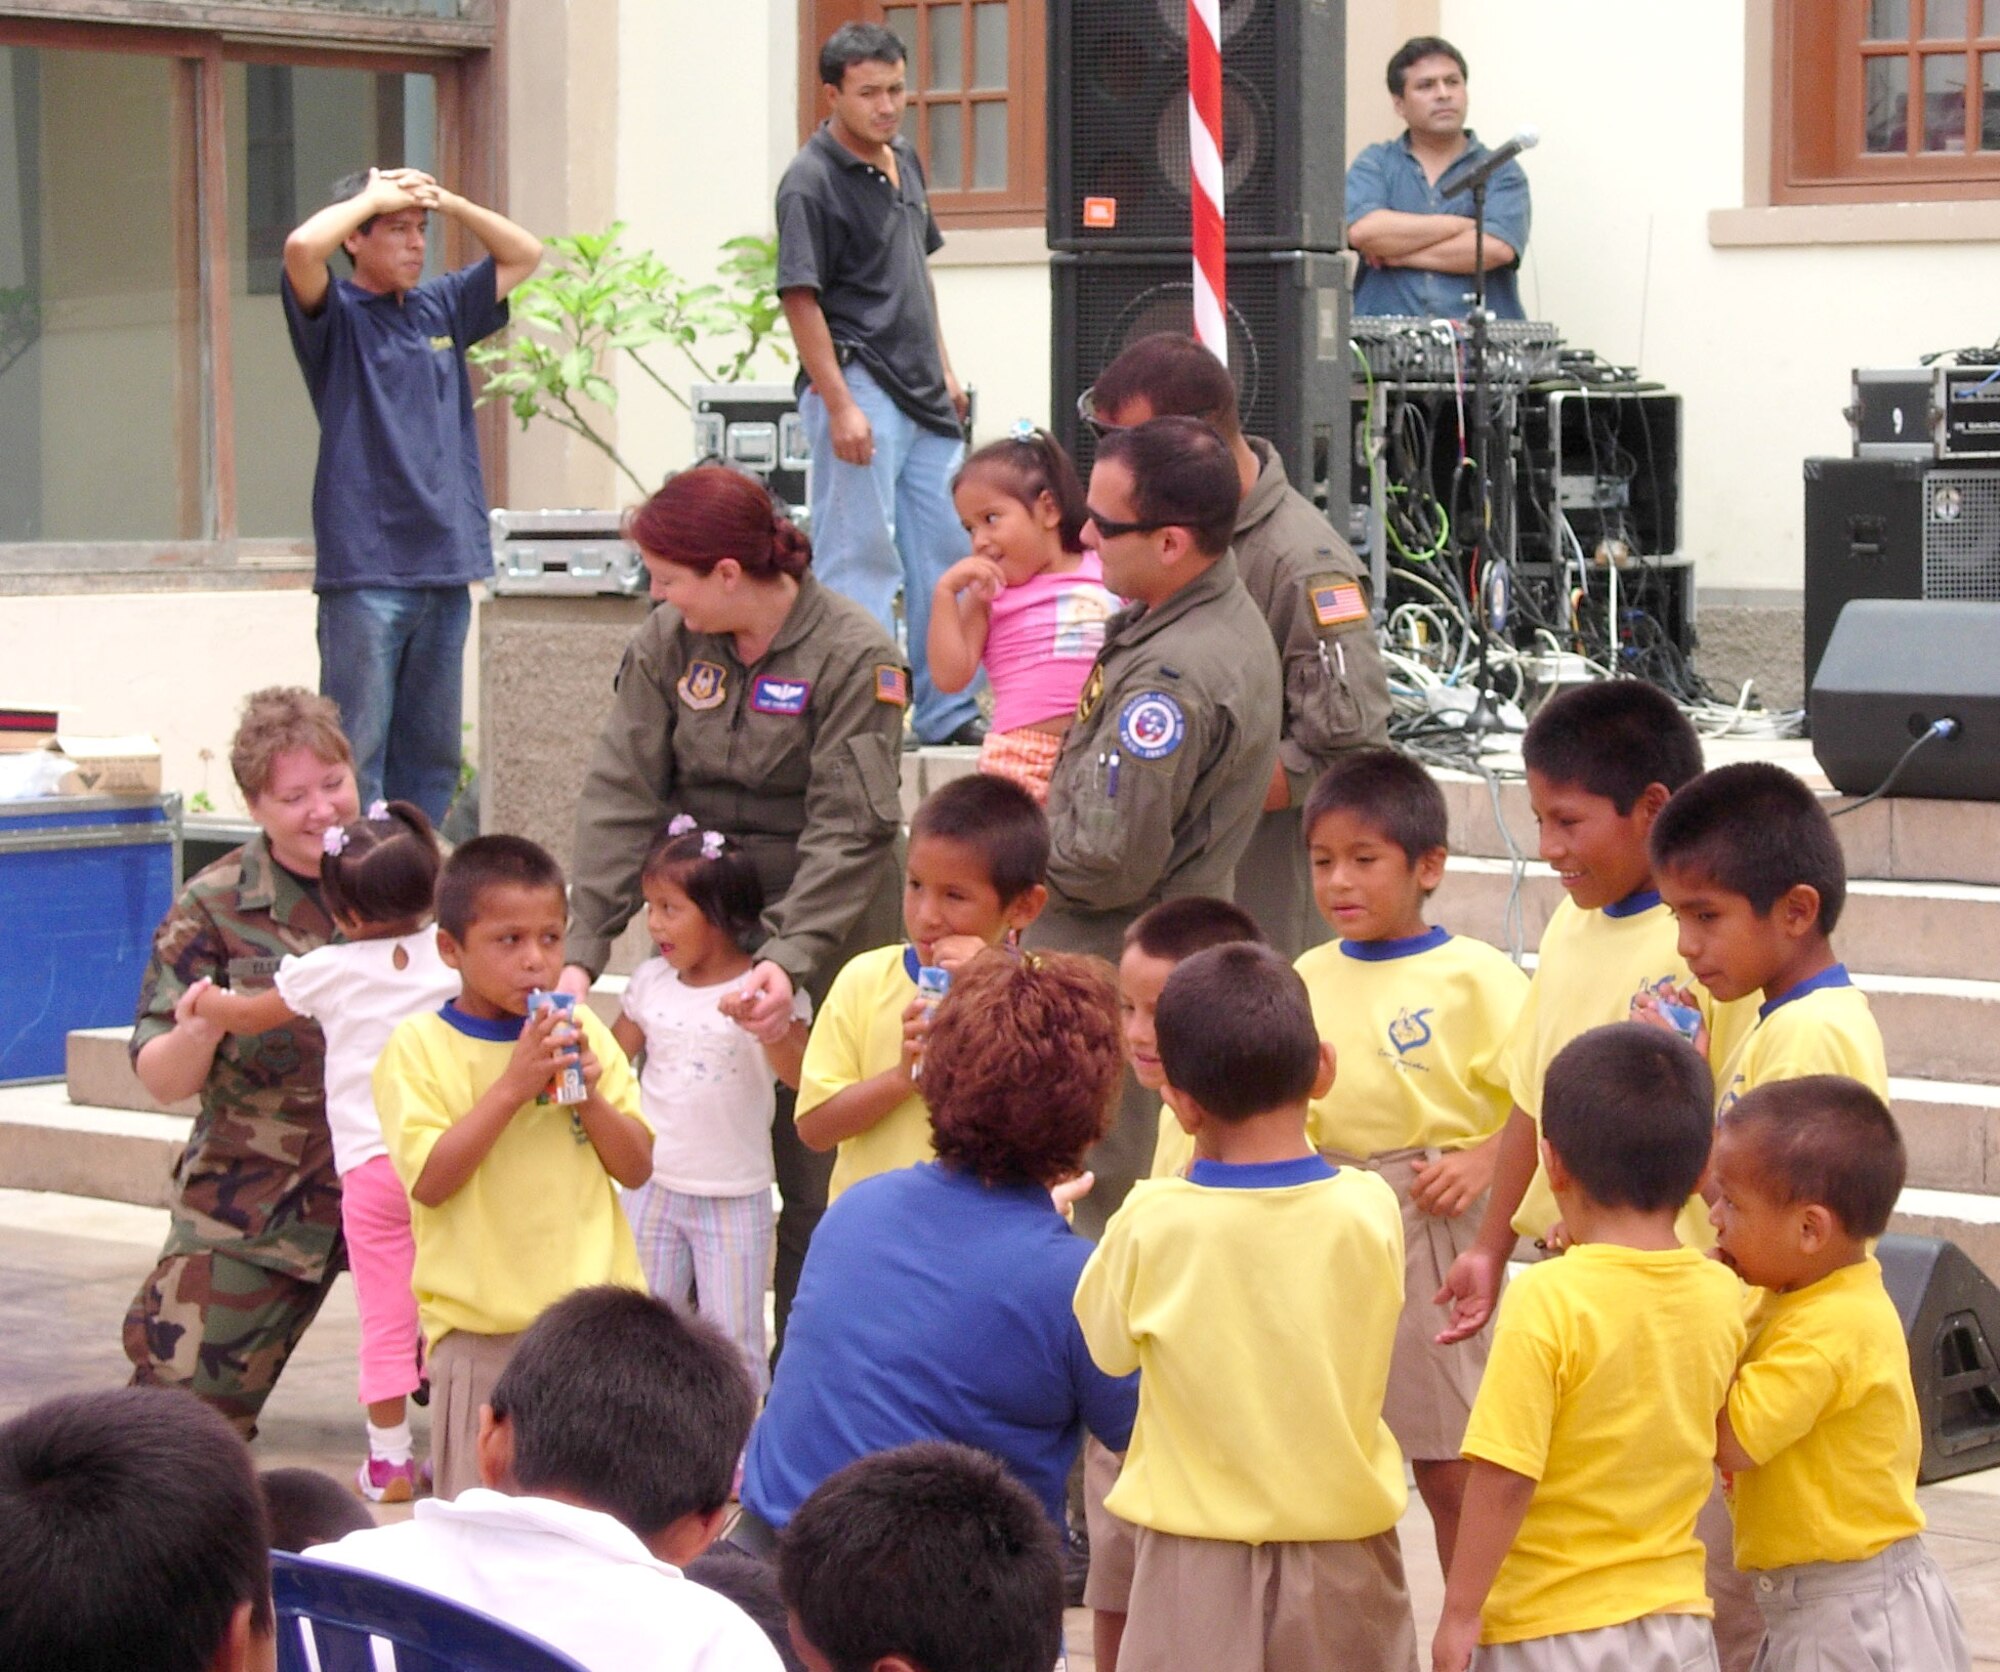 Aircrew members visit with children at a local foster home Feb. 16 at Lima, Peru. Airmen in Peru wrapped up the joint exercise Falcon and Condor 2007 this week and are remaining there for the first joint air show with the Peruvian Air Force this weekend. The Peruvian air show will be the first of the year for aircraft from the 12th Air Force and Air Forces Southern. The joint exercise and air show directly supports U.S. Southern Command's engagement goals and furthers relations between allied nations. (Courtesy photo)